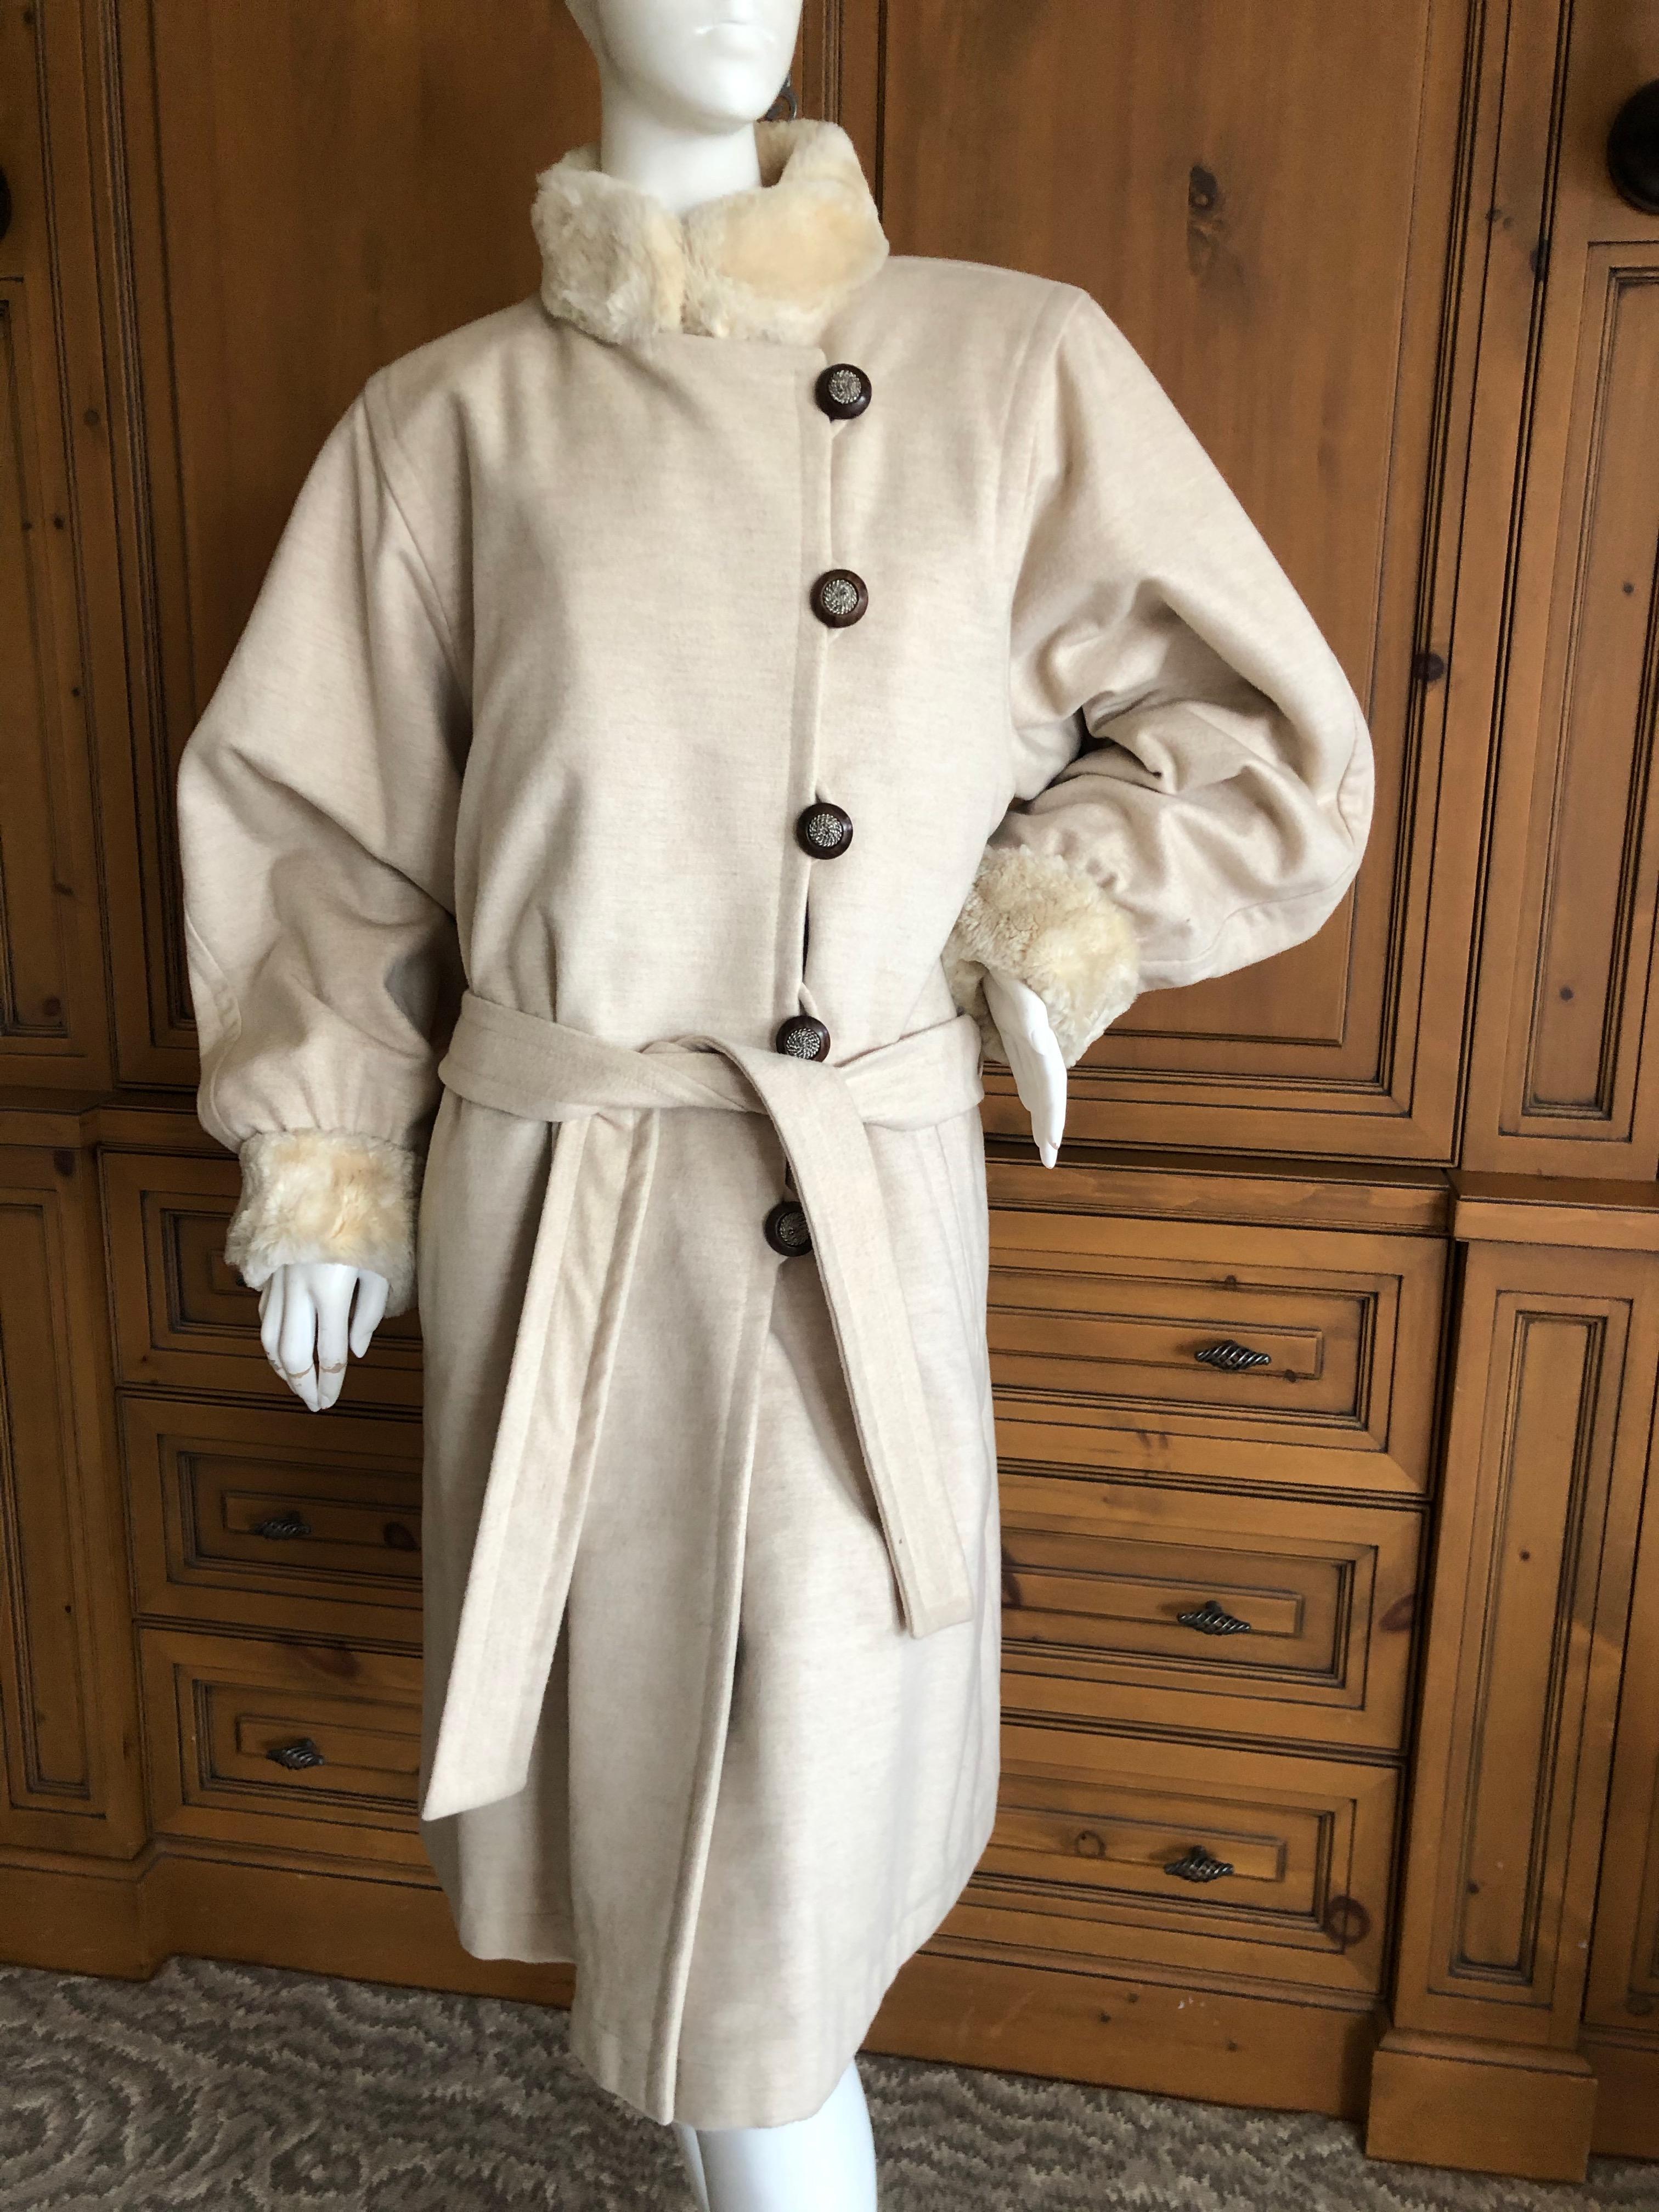 Yves Saint Laurent  Fourrures 1980's Ivory Fur Lined Coat
Styled with bold 1980's shoulders, it buttons down the front and belts for styling.
The fabric feels like a cashmere wool blend and I believe the fur is sheared beaver.
Sz 40
Bust 42